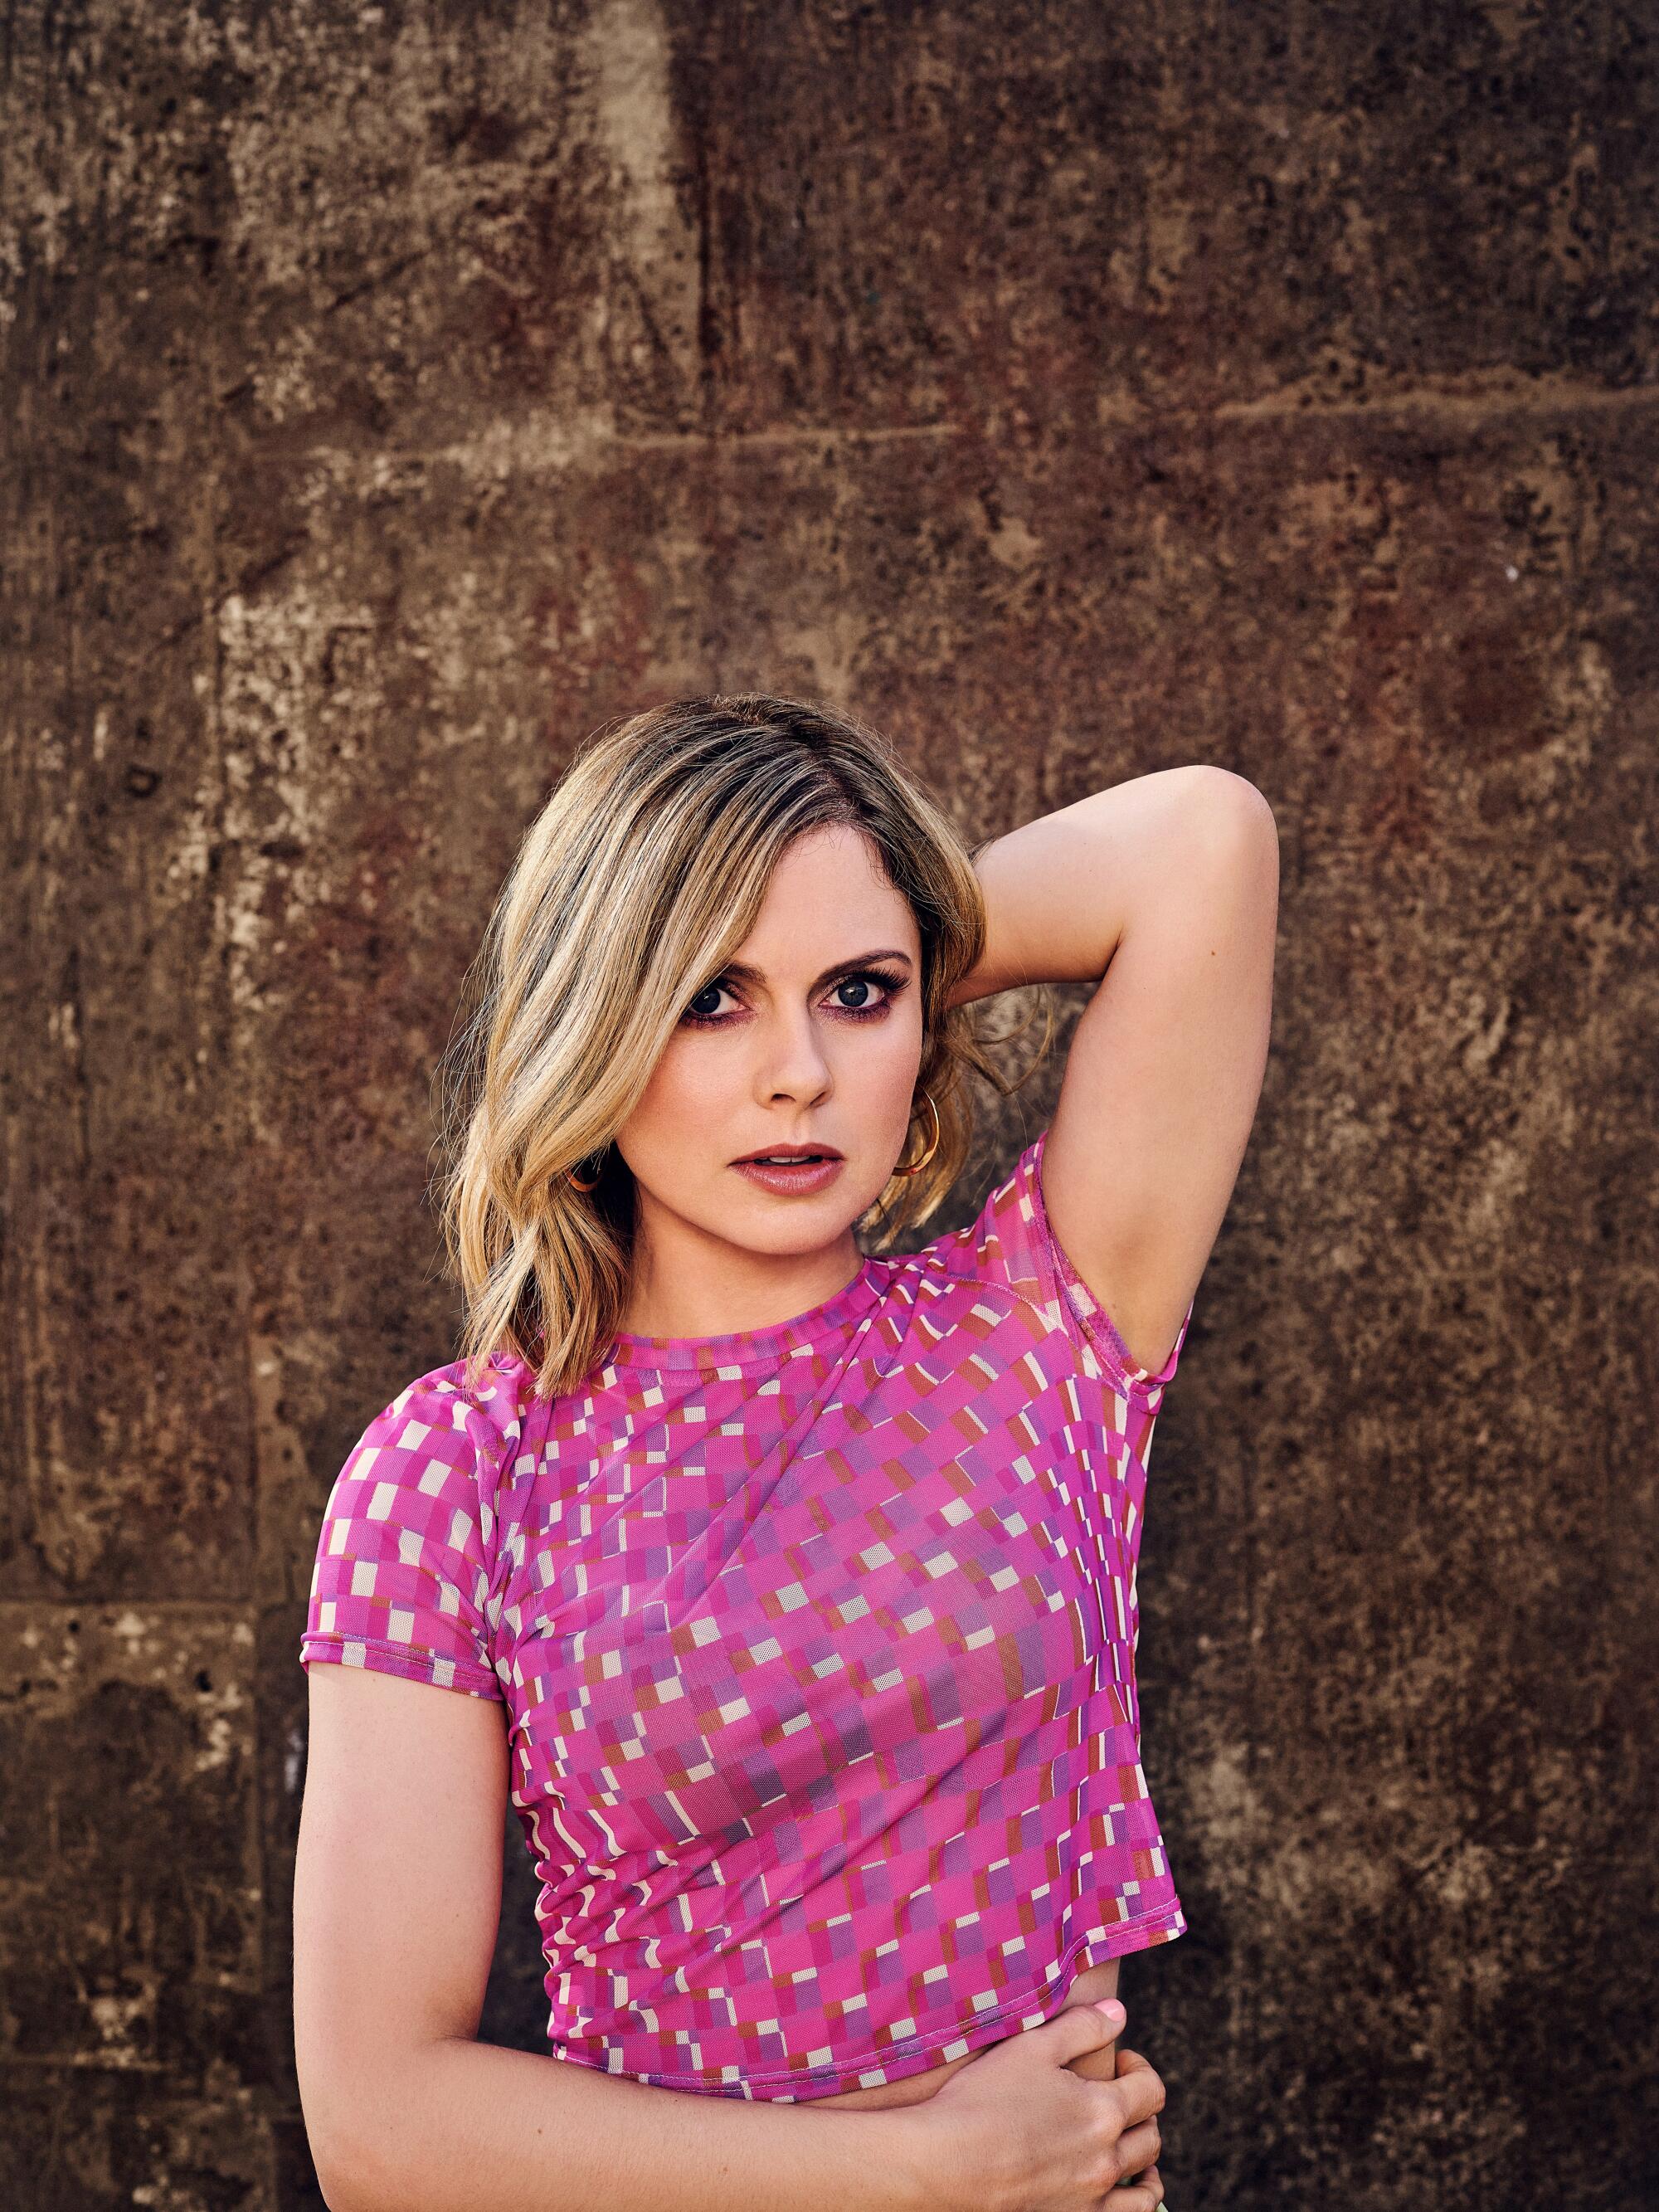 Rose McIver wears a cropped top and covers her midriff with one arm for a portrait.